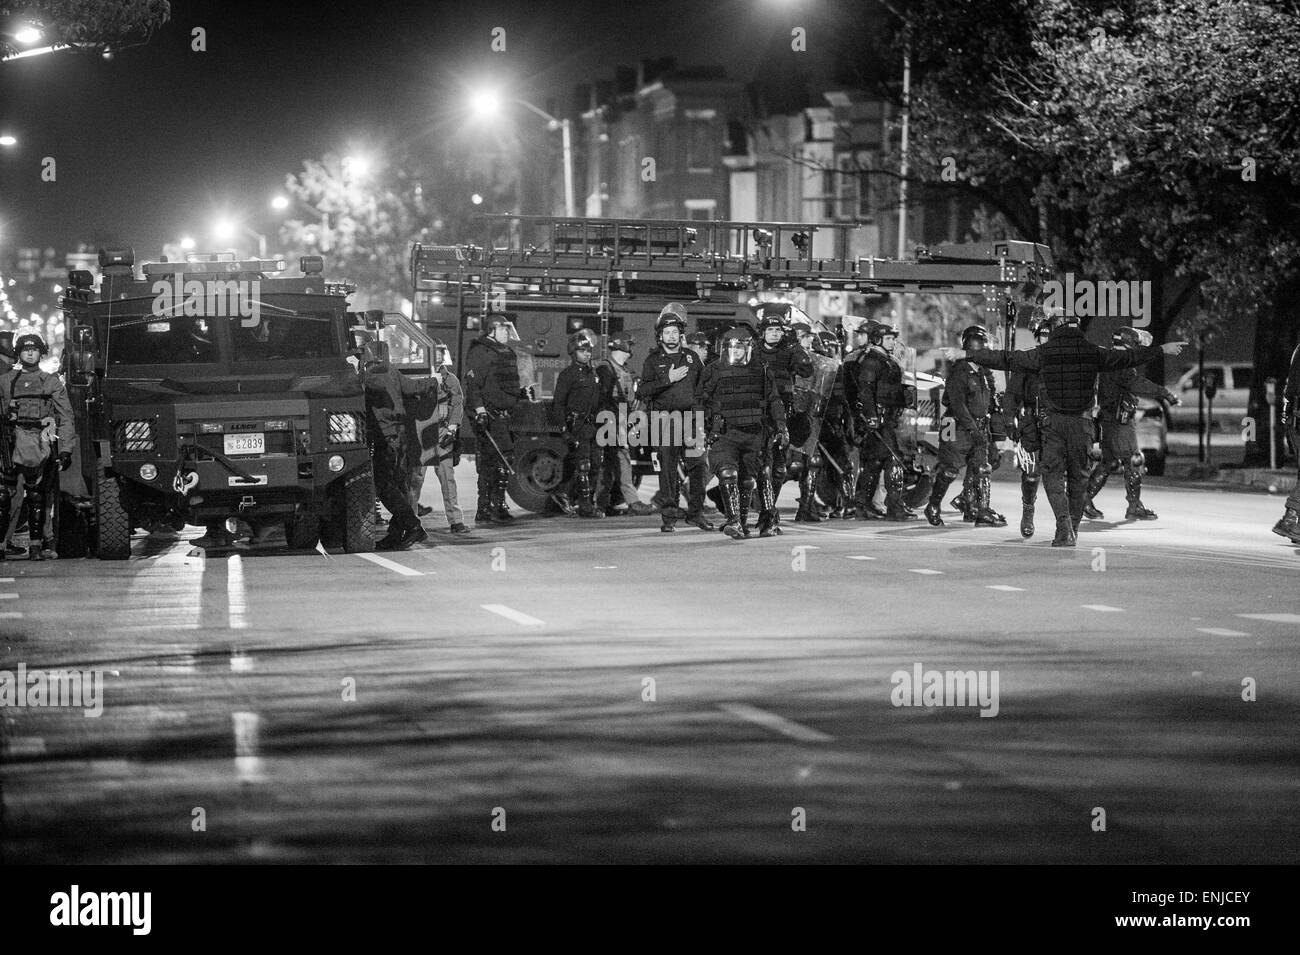 After the cop related death of Freddie Gray, West Baltimore erupted in riots and protests attempting to bring attention to police brutality within the Baltimore Police Department. Here, along with a group of protesters convened at Pennsylvania and North Avenue in West Baltimore, riot police wait armed to enforce the 10pm curfew. Stock Photo